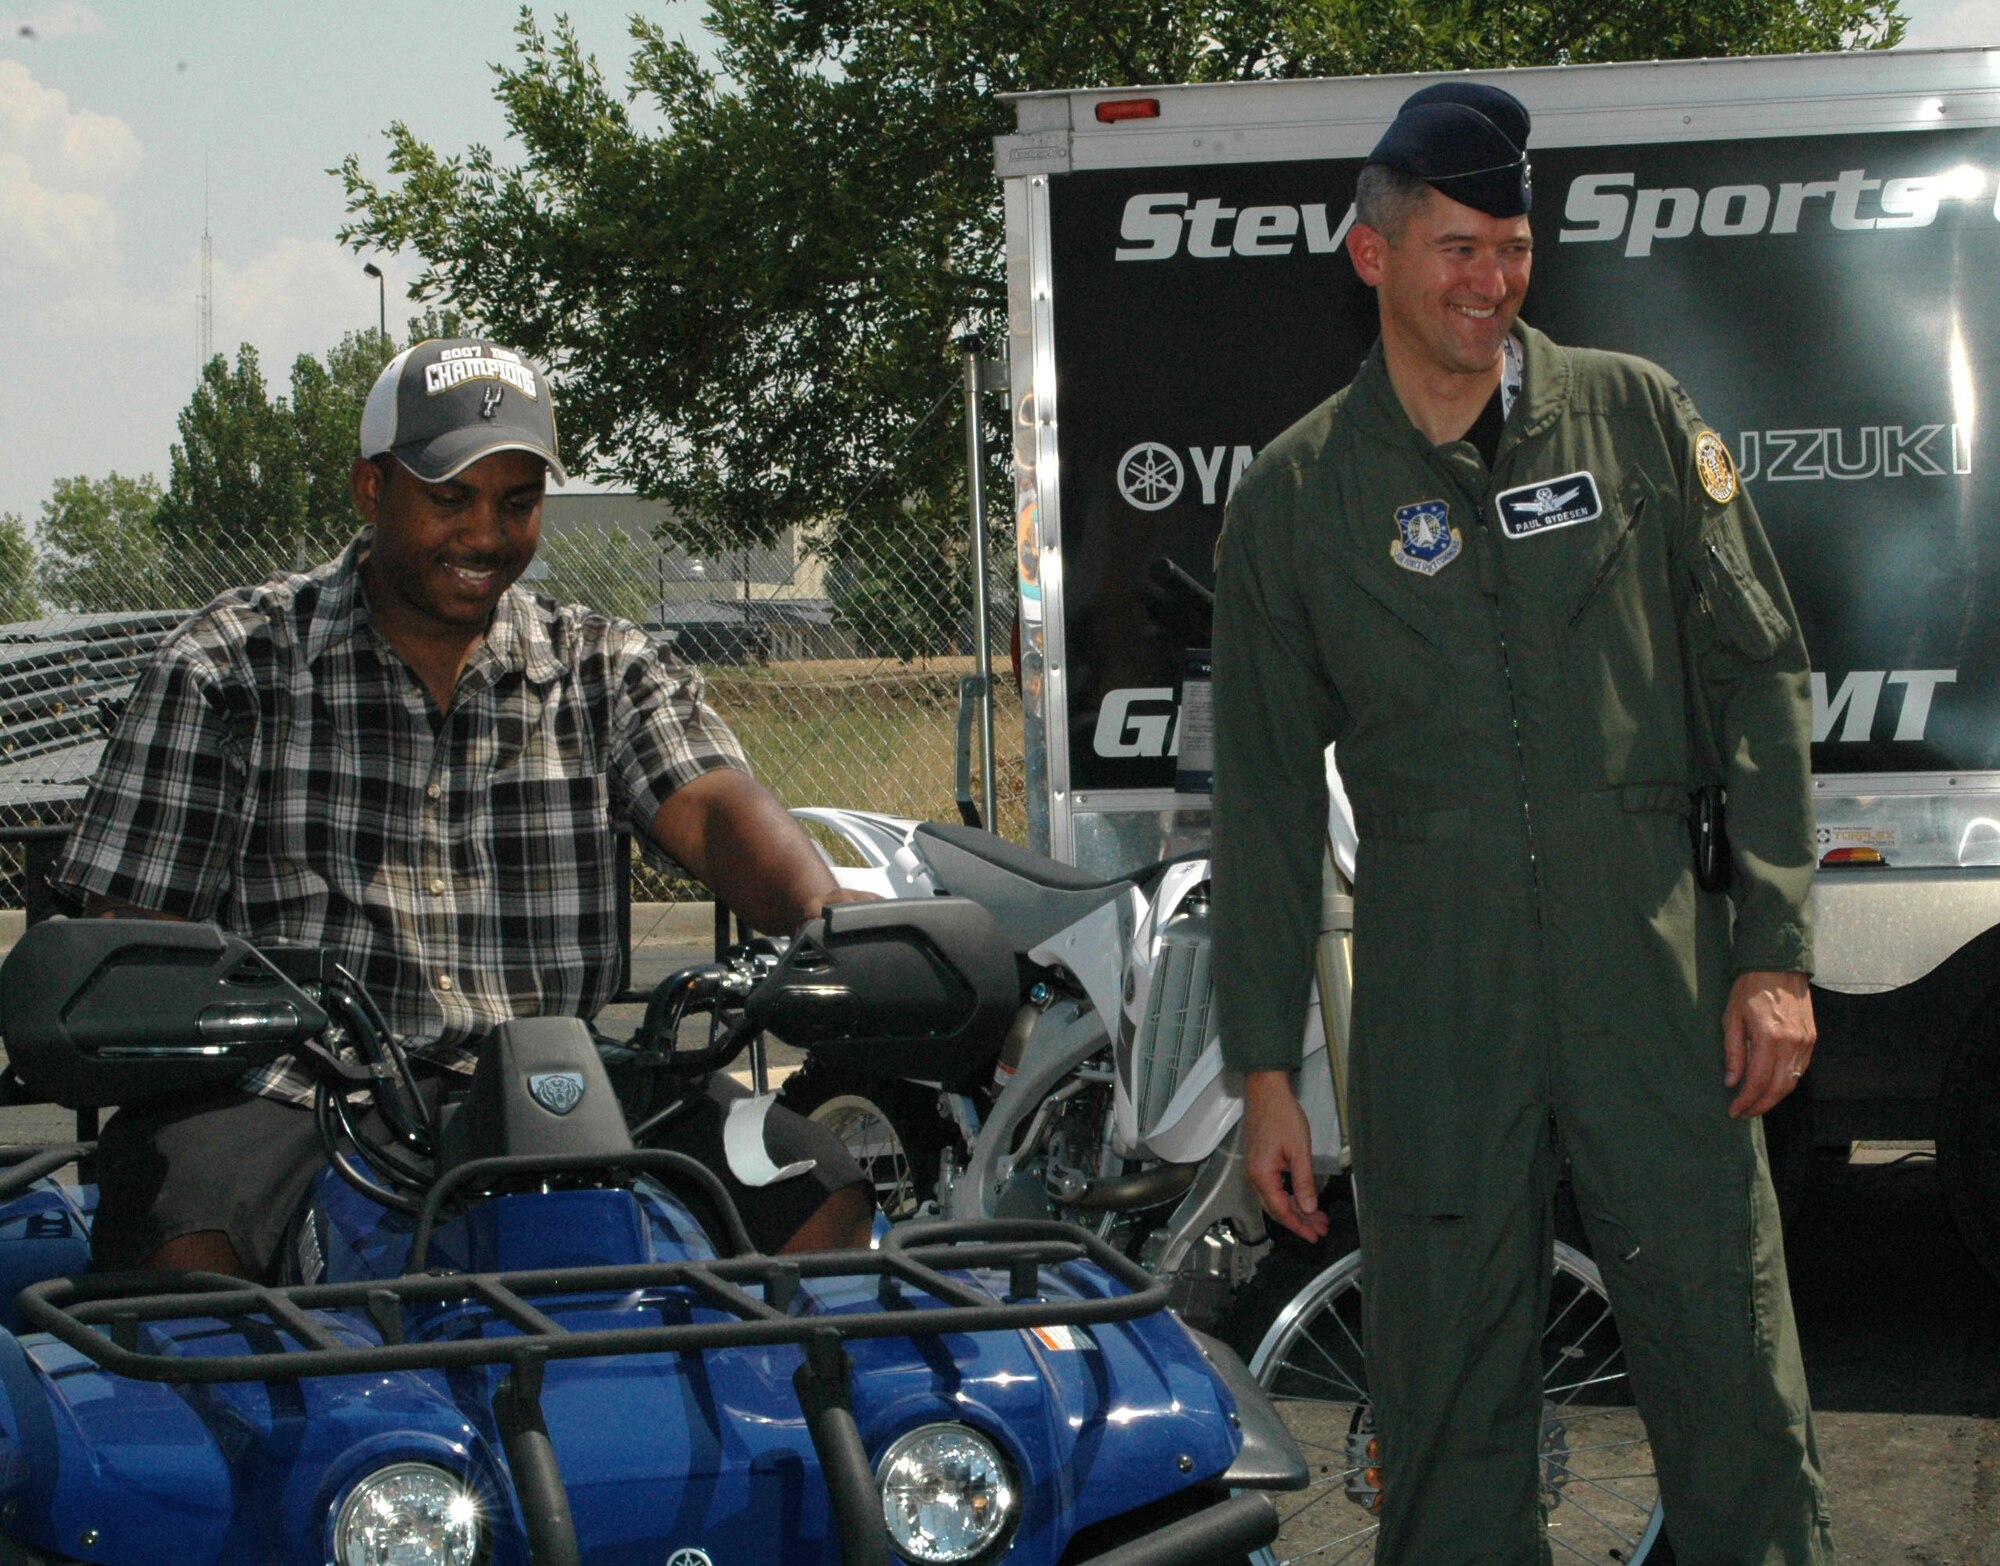 Tech. Sgt. Robert Pierce, 341st Medical Operations Squadron dental technician, sits on his new four-wheeler he won at the Malmstrom Air Force Base picnic after his name was pulled from 735 contest entries. Col. Paul Gydeson, 341st Space Wing vice commander, presented the prize to him at the free, annual summer event sponsored by the 341st Services Squadron and several area businesses. (U.S. Air Force photo/Airman 1st Class Dillon White).